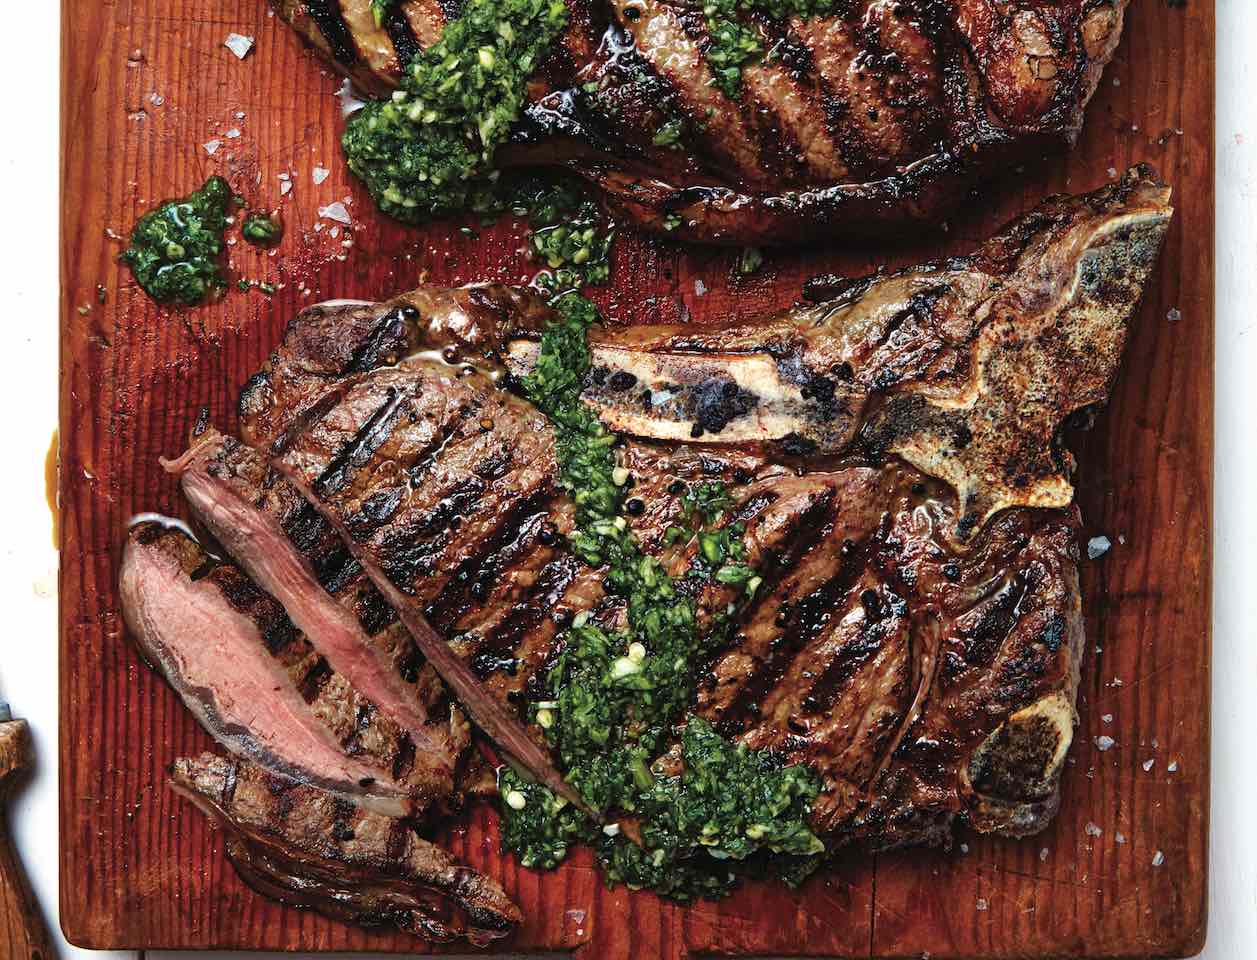 Two steak on wooden board covered in herb sauce.